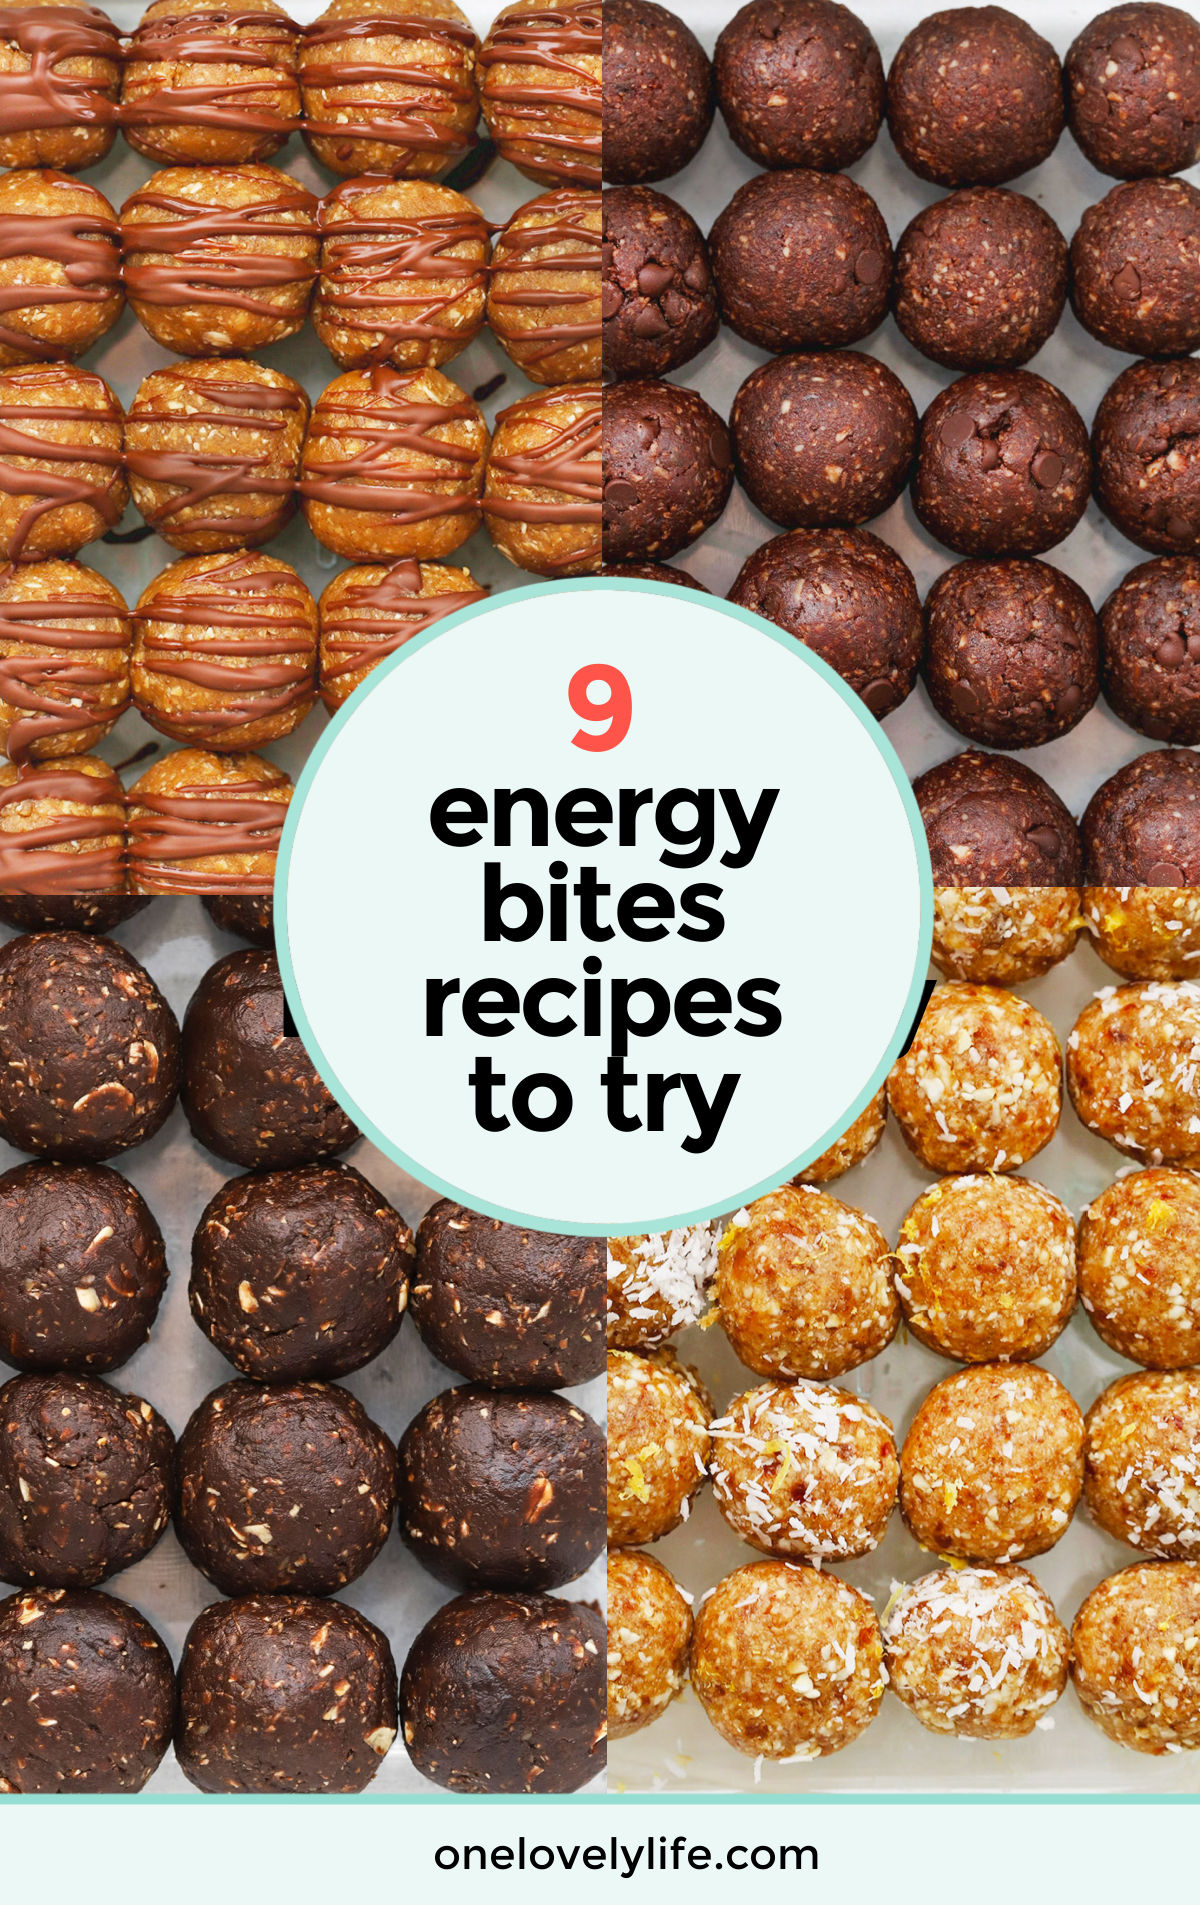 9 Of The BEST Energy Bites Recipes Around. These easy energy bite recipes make for delicious healthy snacks or healthy treats any time! // energy bite recipes // healthy energy bites recipes // kid friendly energy bites / kids snacks / school lunch snacks / after school snacks / vegan snack ideas / gluten free snacks / gluten free snack ideas // healthy snack / healthy treat / energy balls recipe / energy balls recipes / healthy energy balls